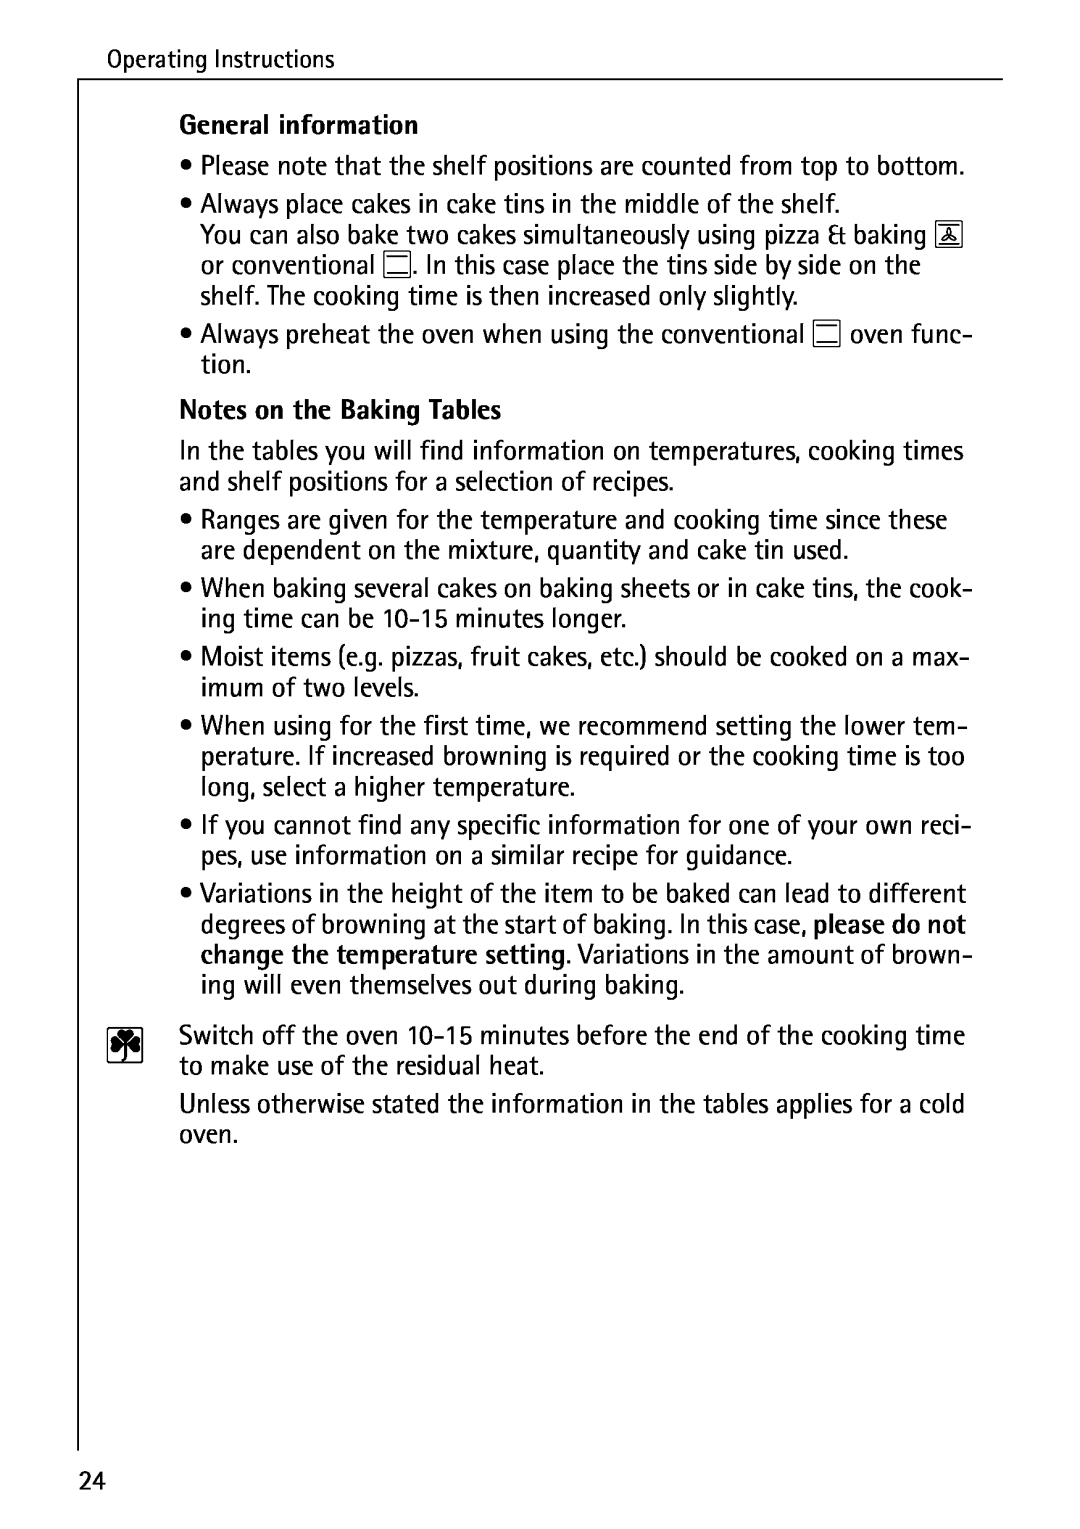 AEG B 4100 operating instructions General information, Notes on the Baking Tables 